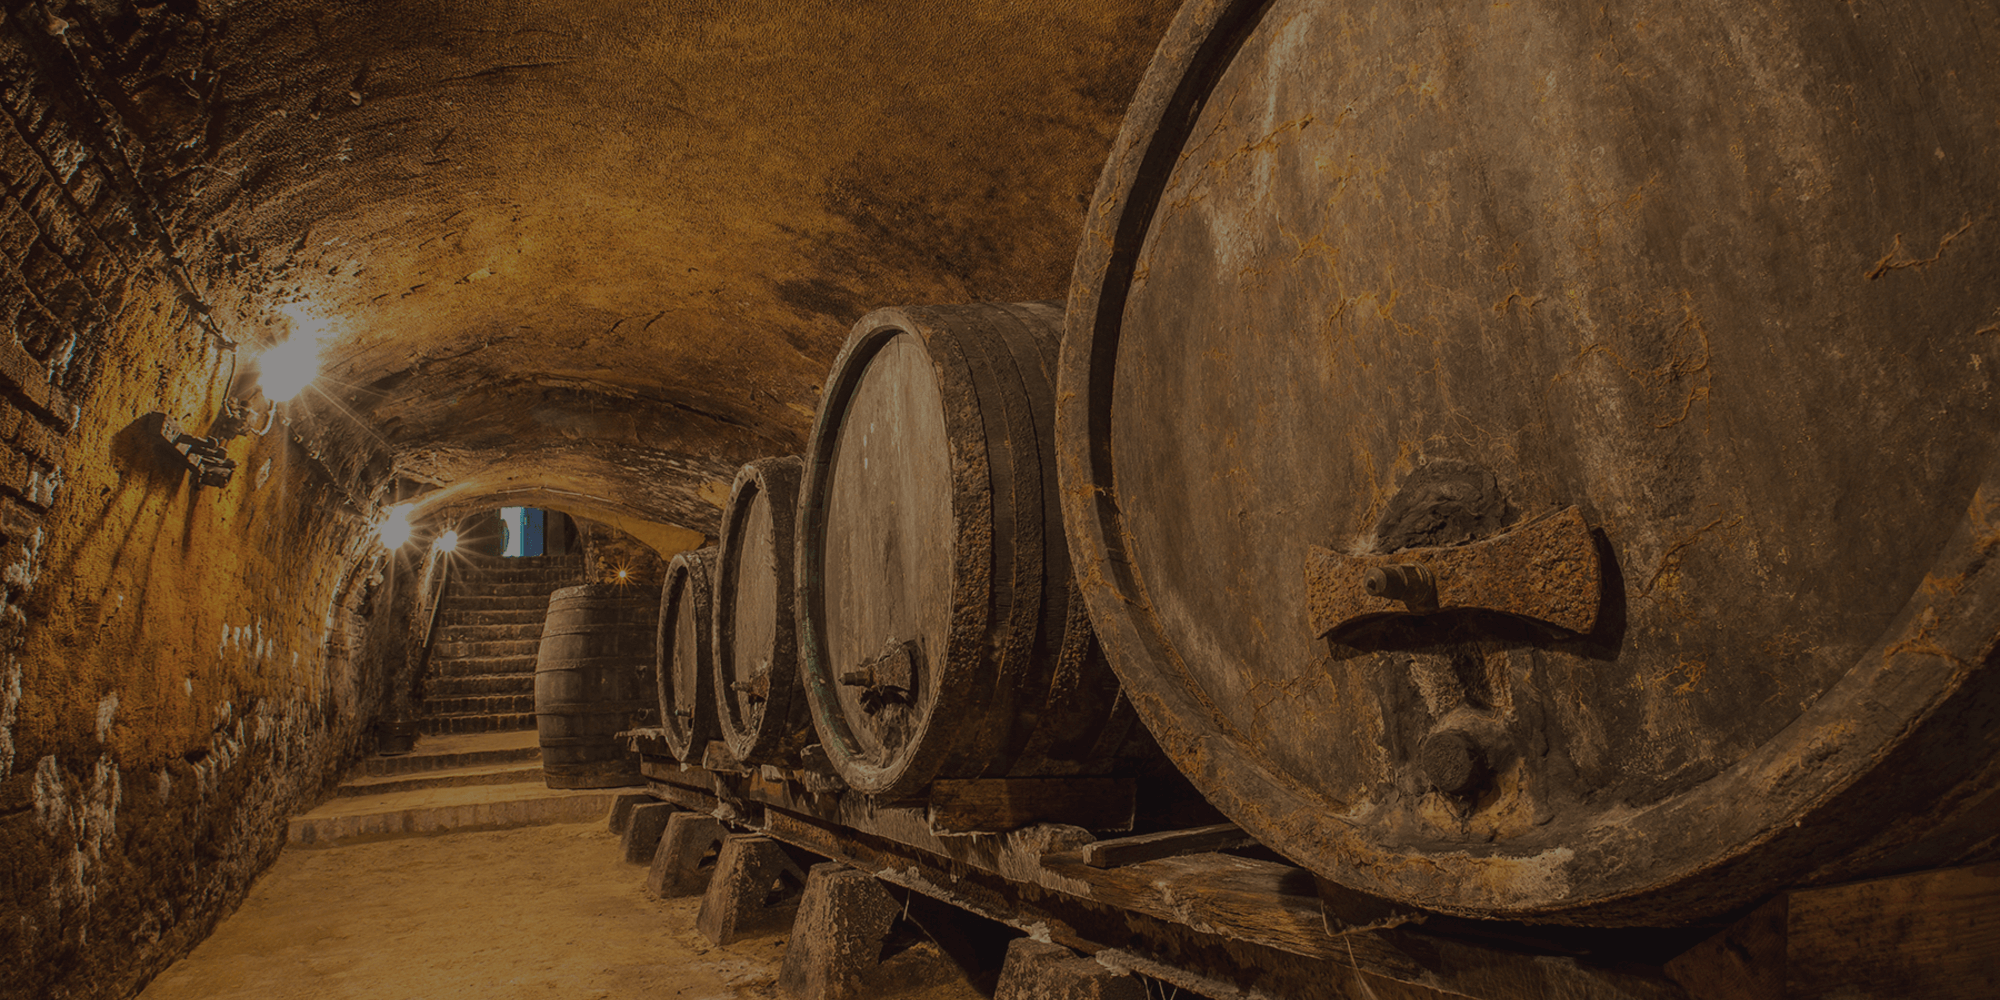 Investing in whisky barrels